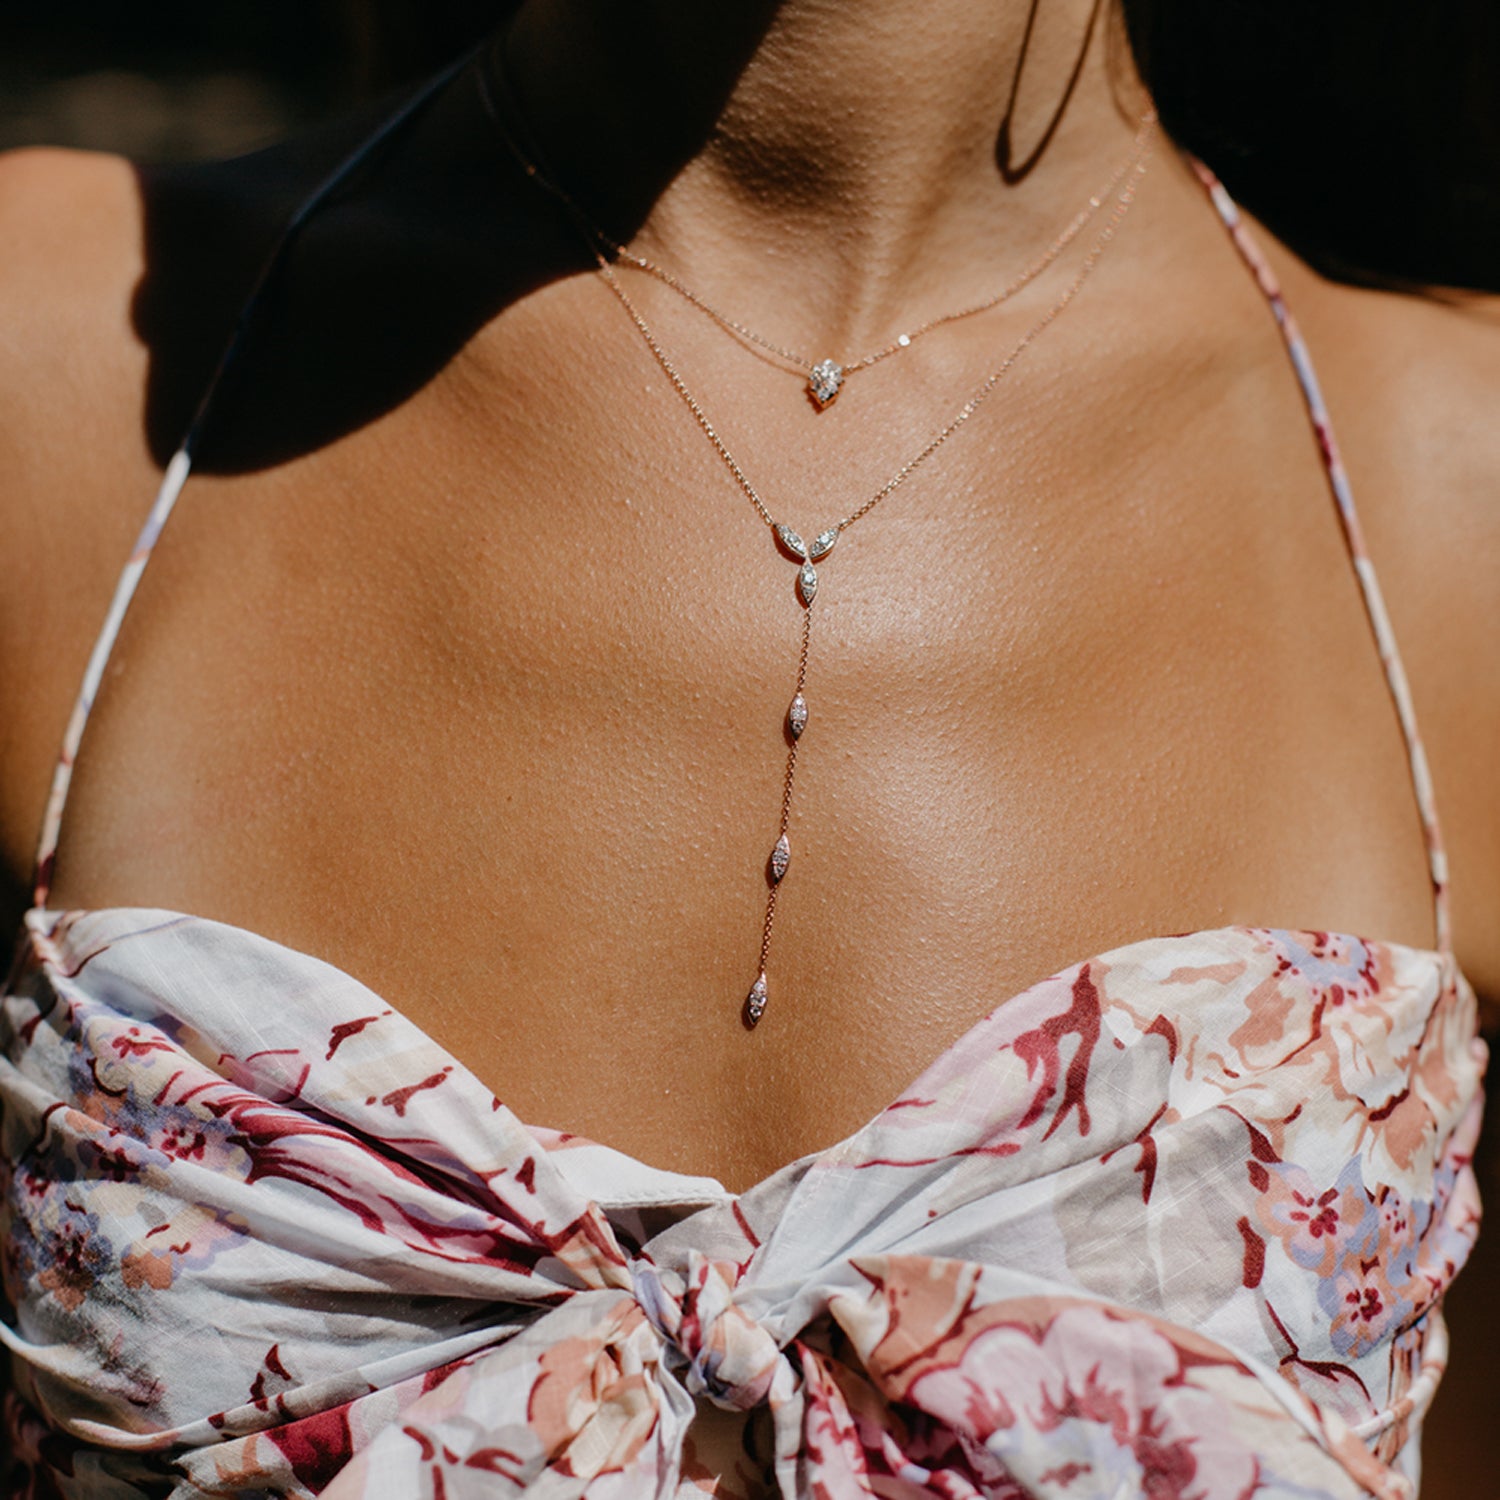 Cascade Lariat shown in Rose Gold